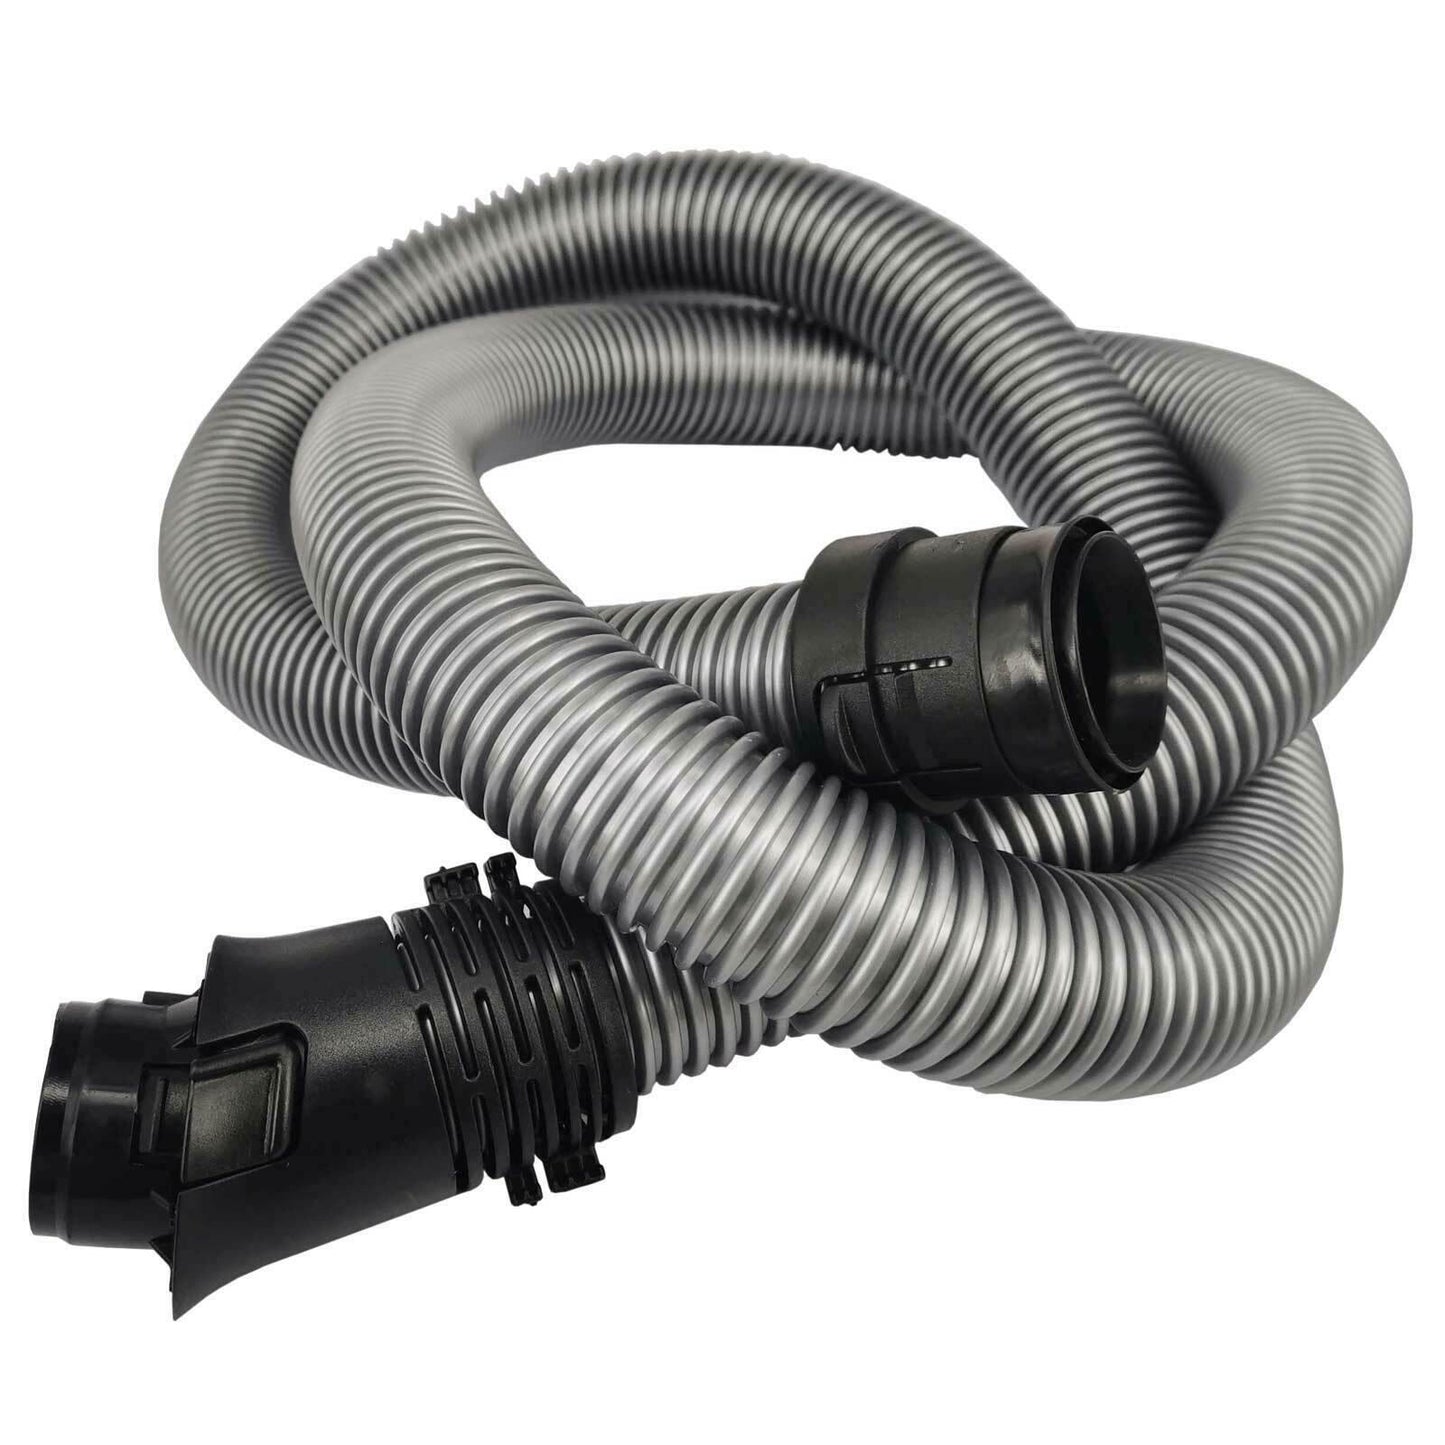 Vacuum Cleaner Hose Pipe For Miele S4 S4000 S5 S5000 7330630 Sparesbarn